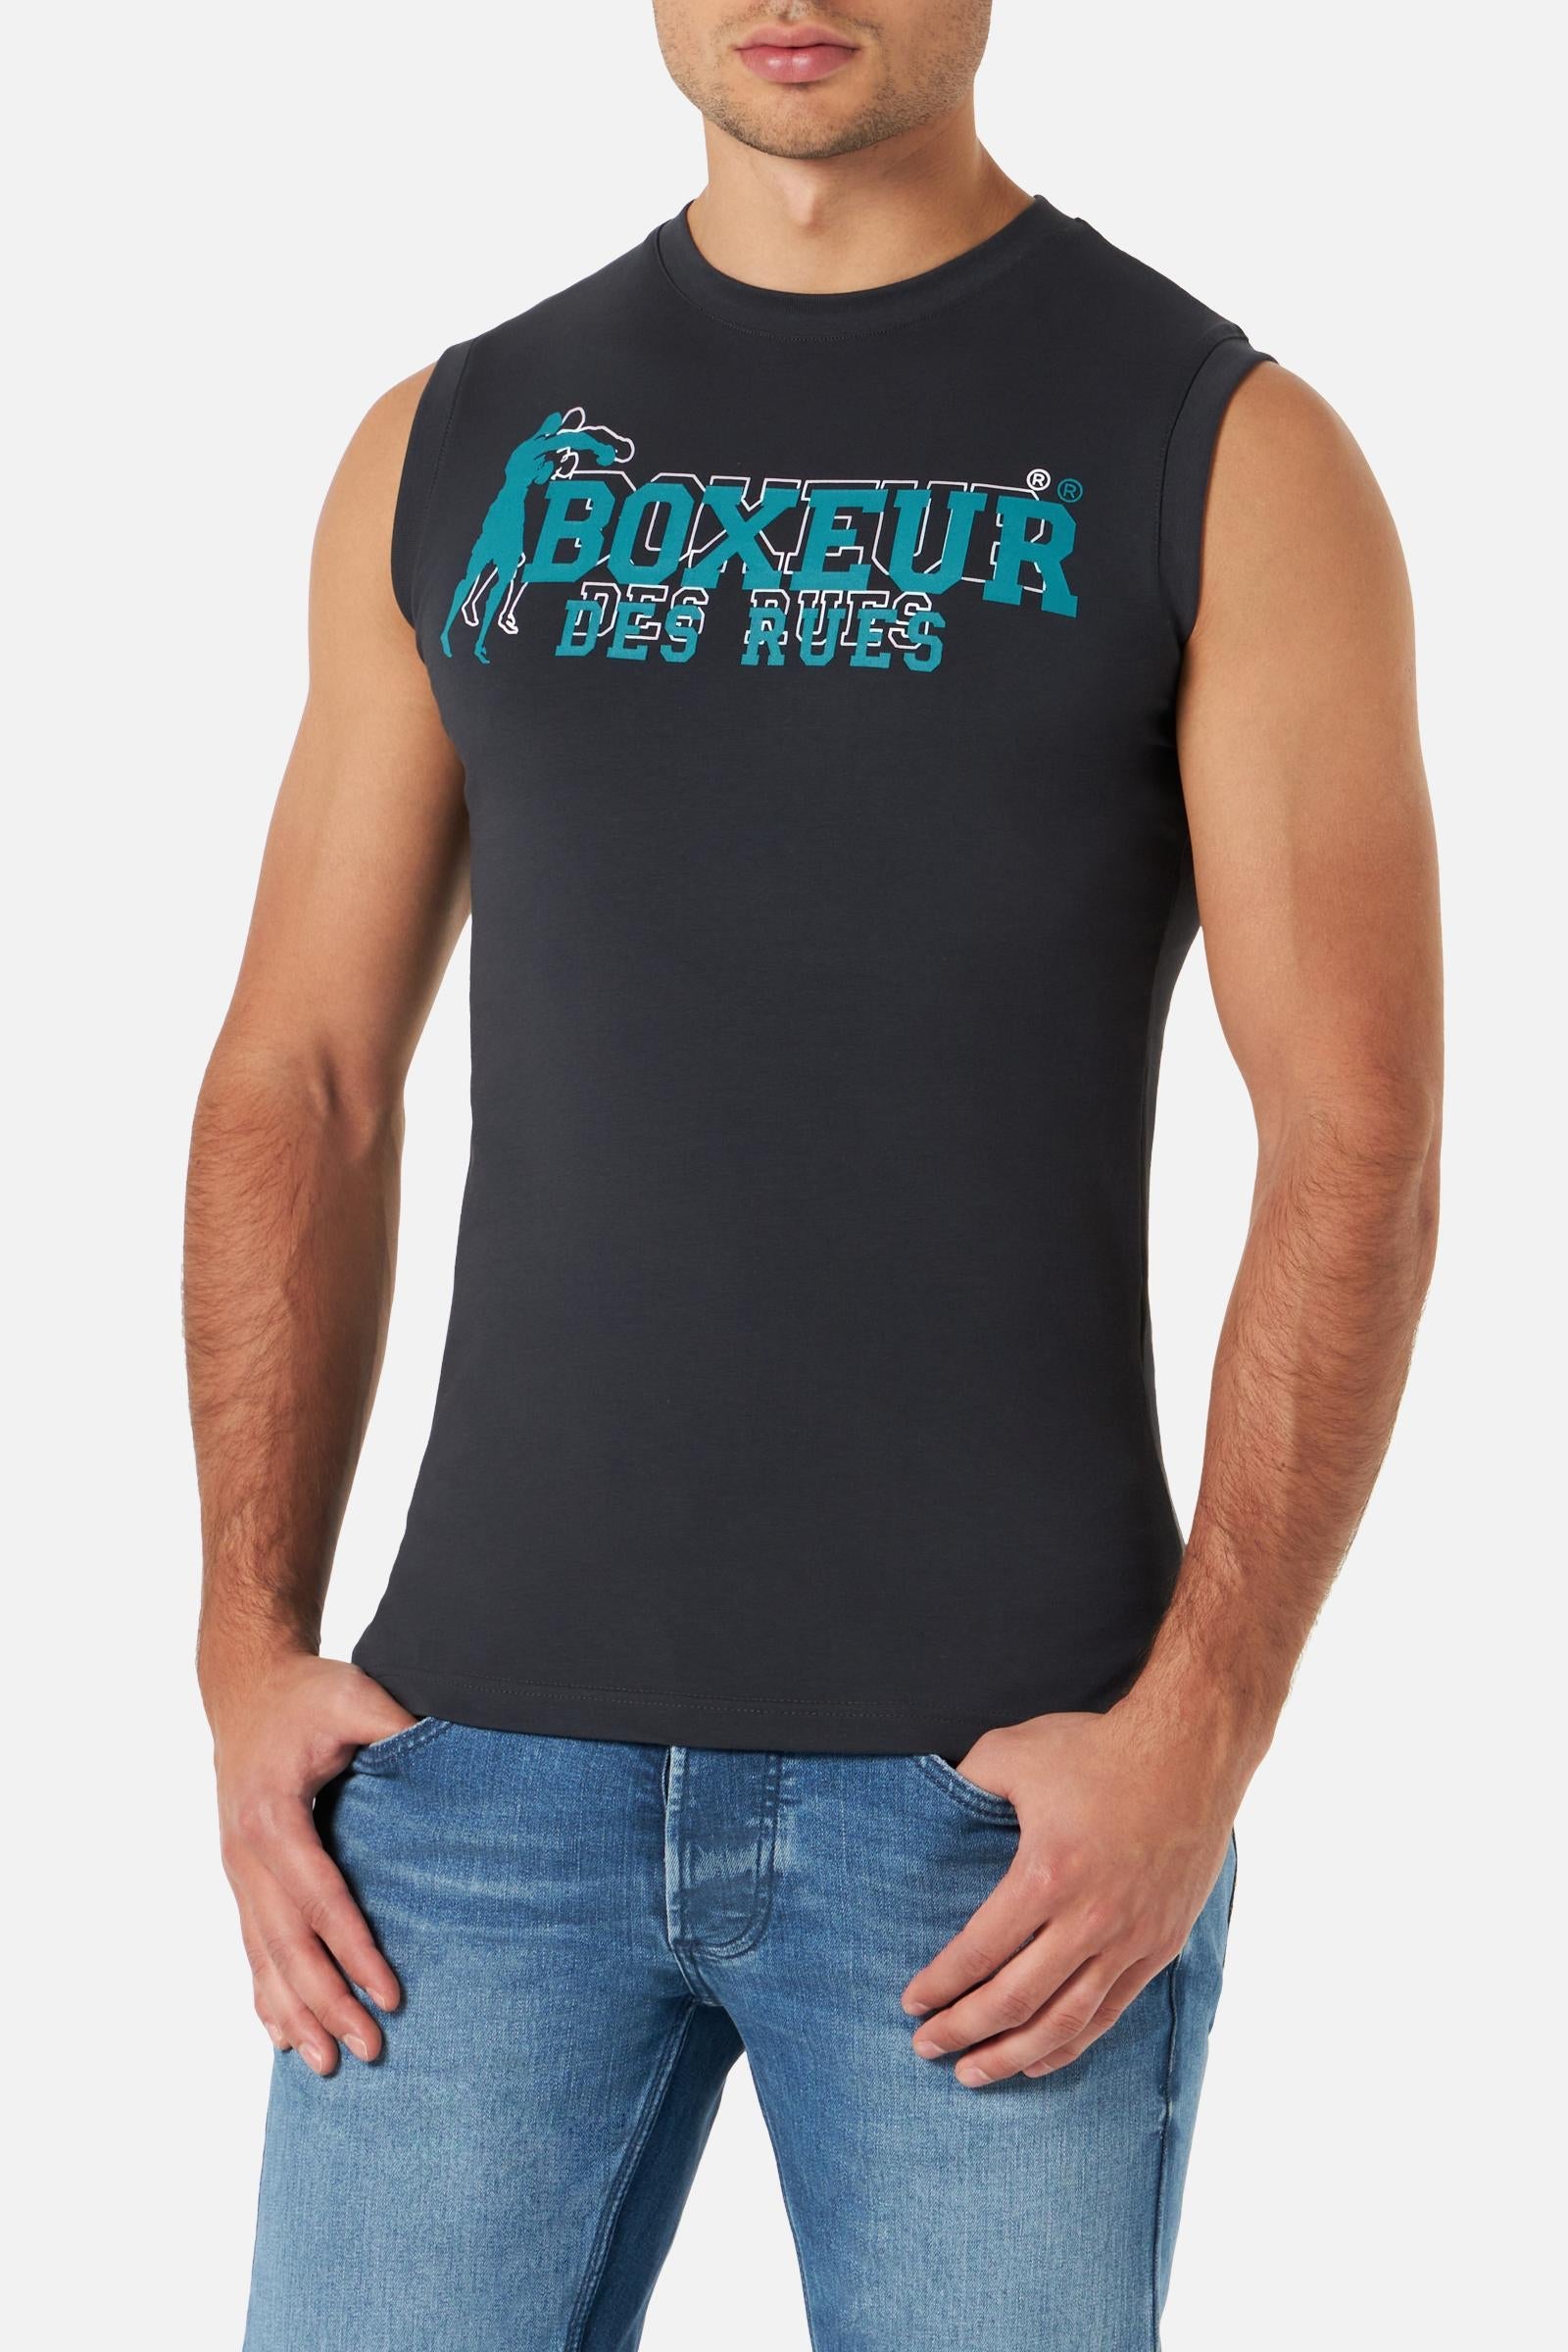 Printed Tank in Anthracite Tops Boxeur des Rues   